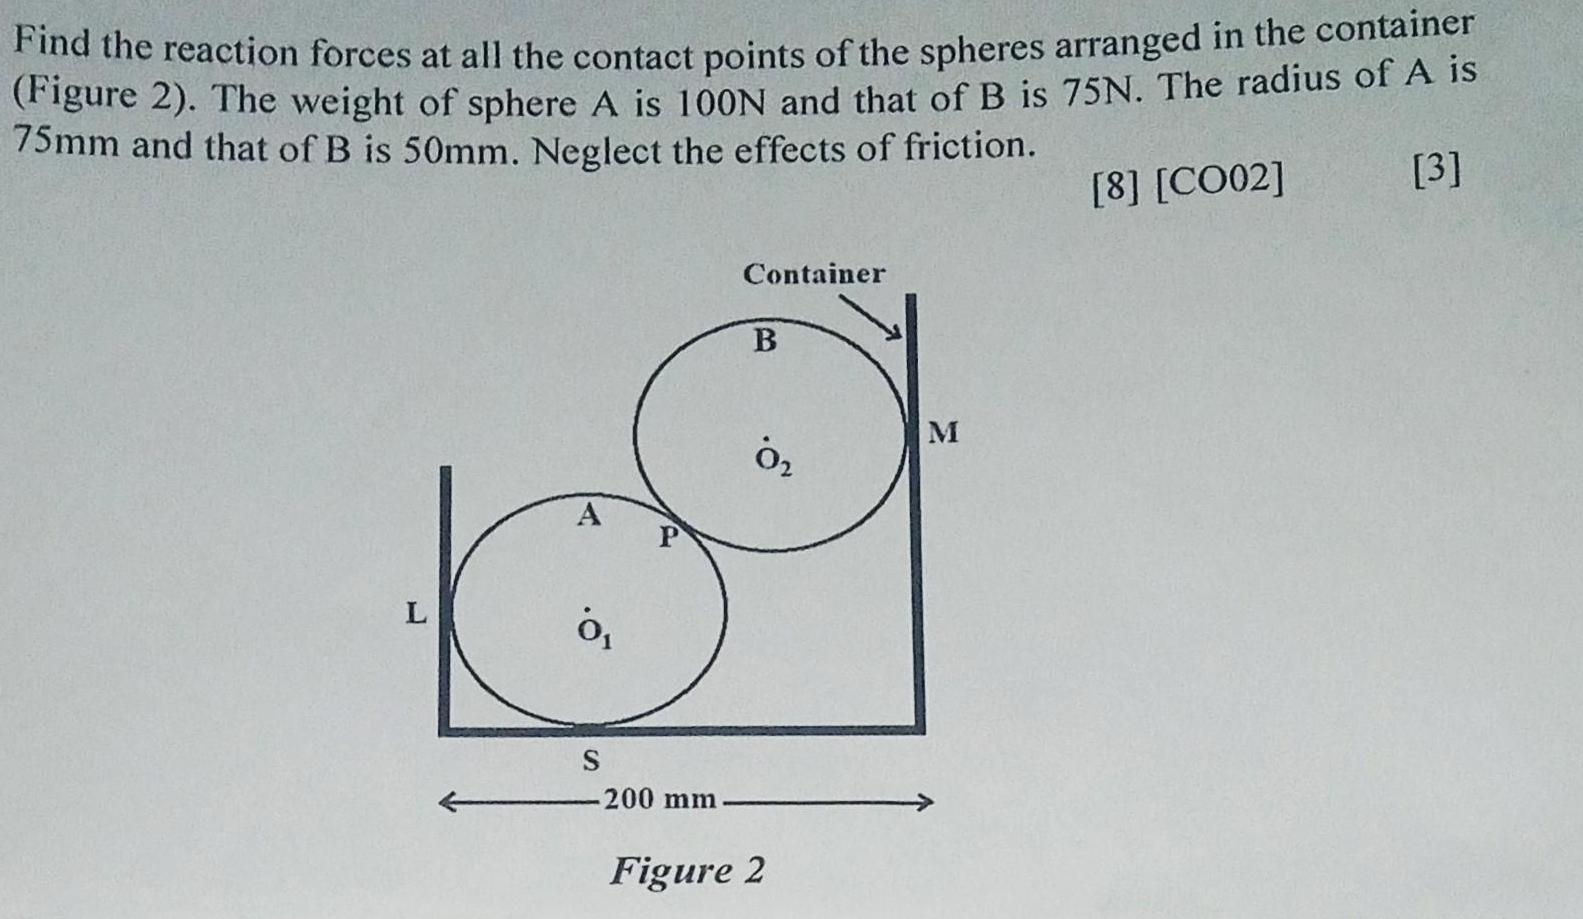 Find the reaction forces at all the contact points of the spheres arranged in the container (Figure 2). The